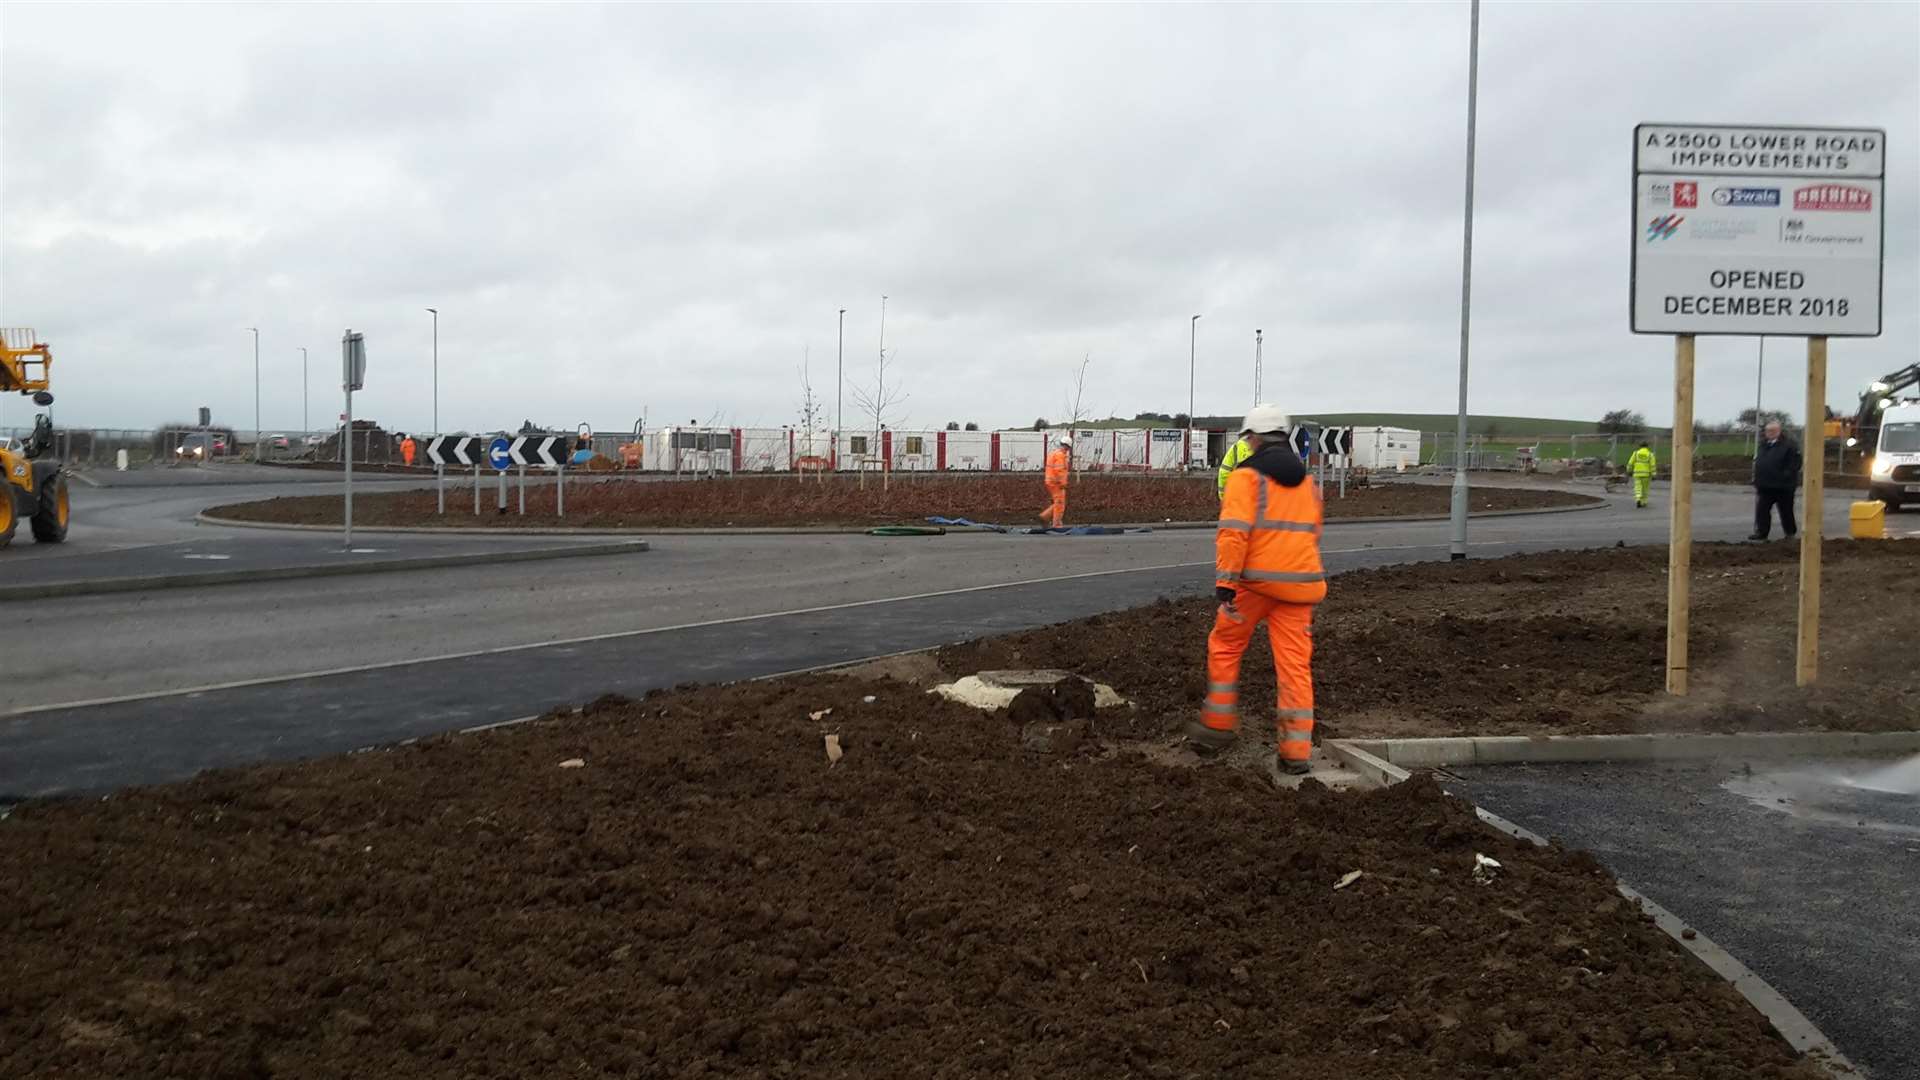 The roundabout is due to open for the first time today